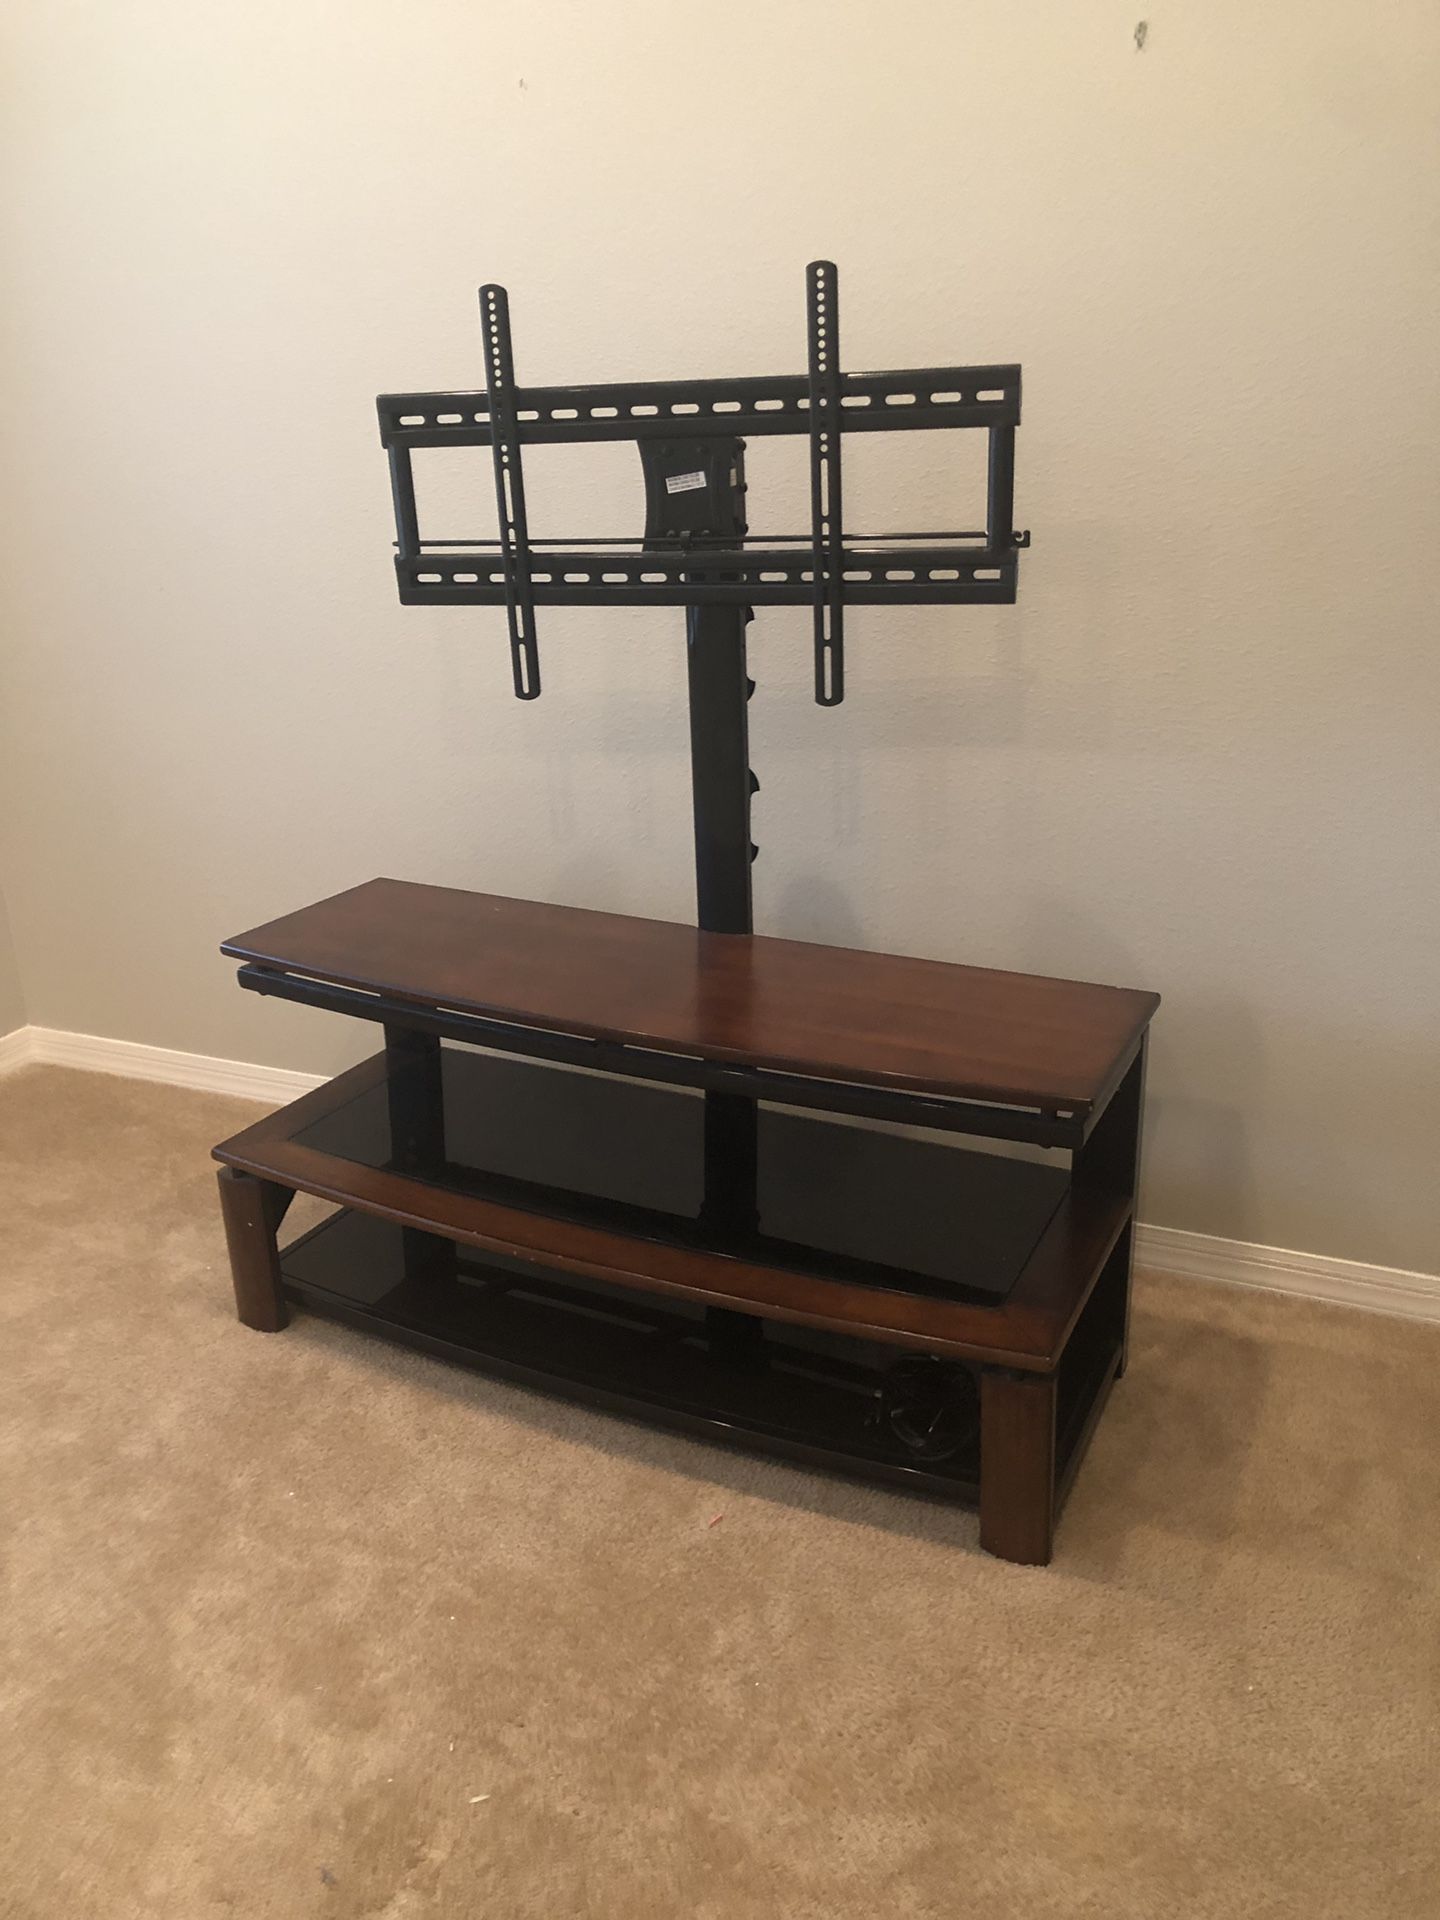 Up 60” TV stand perfect condition